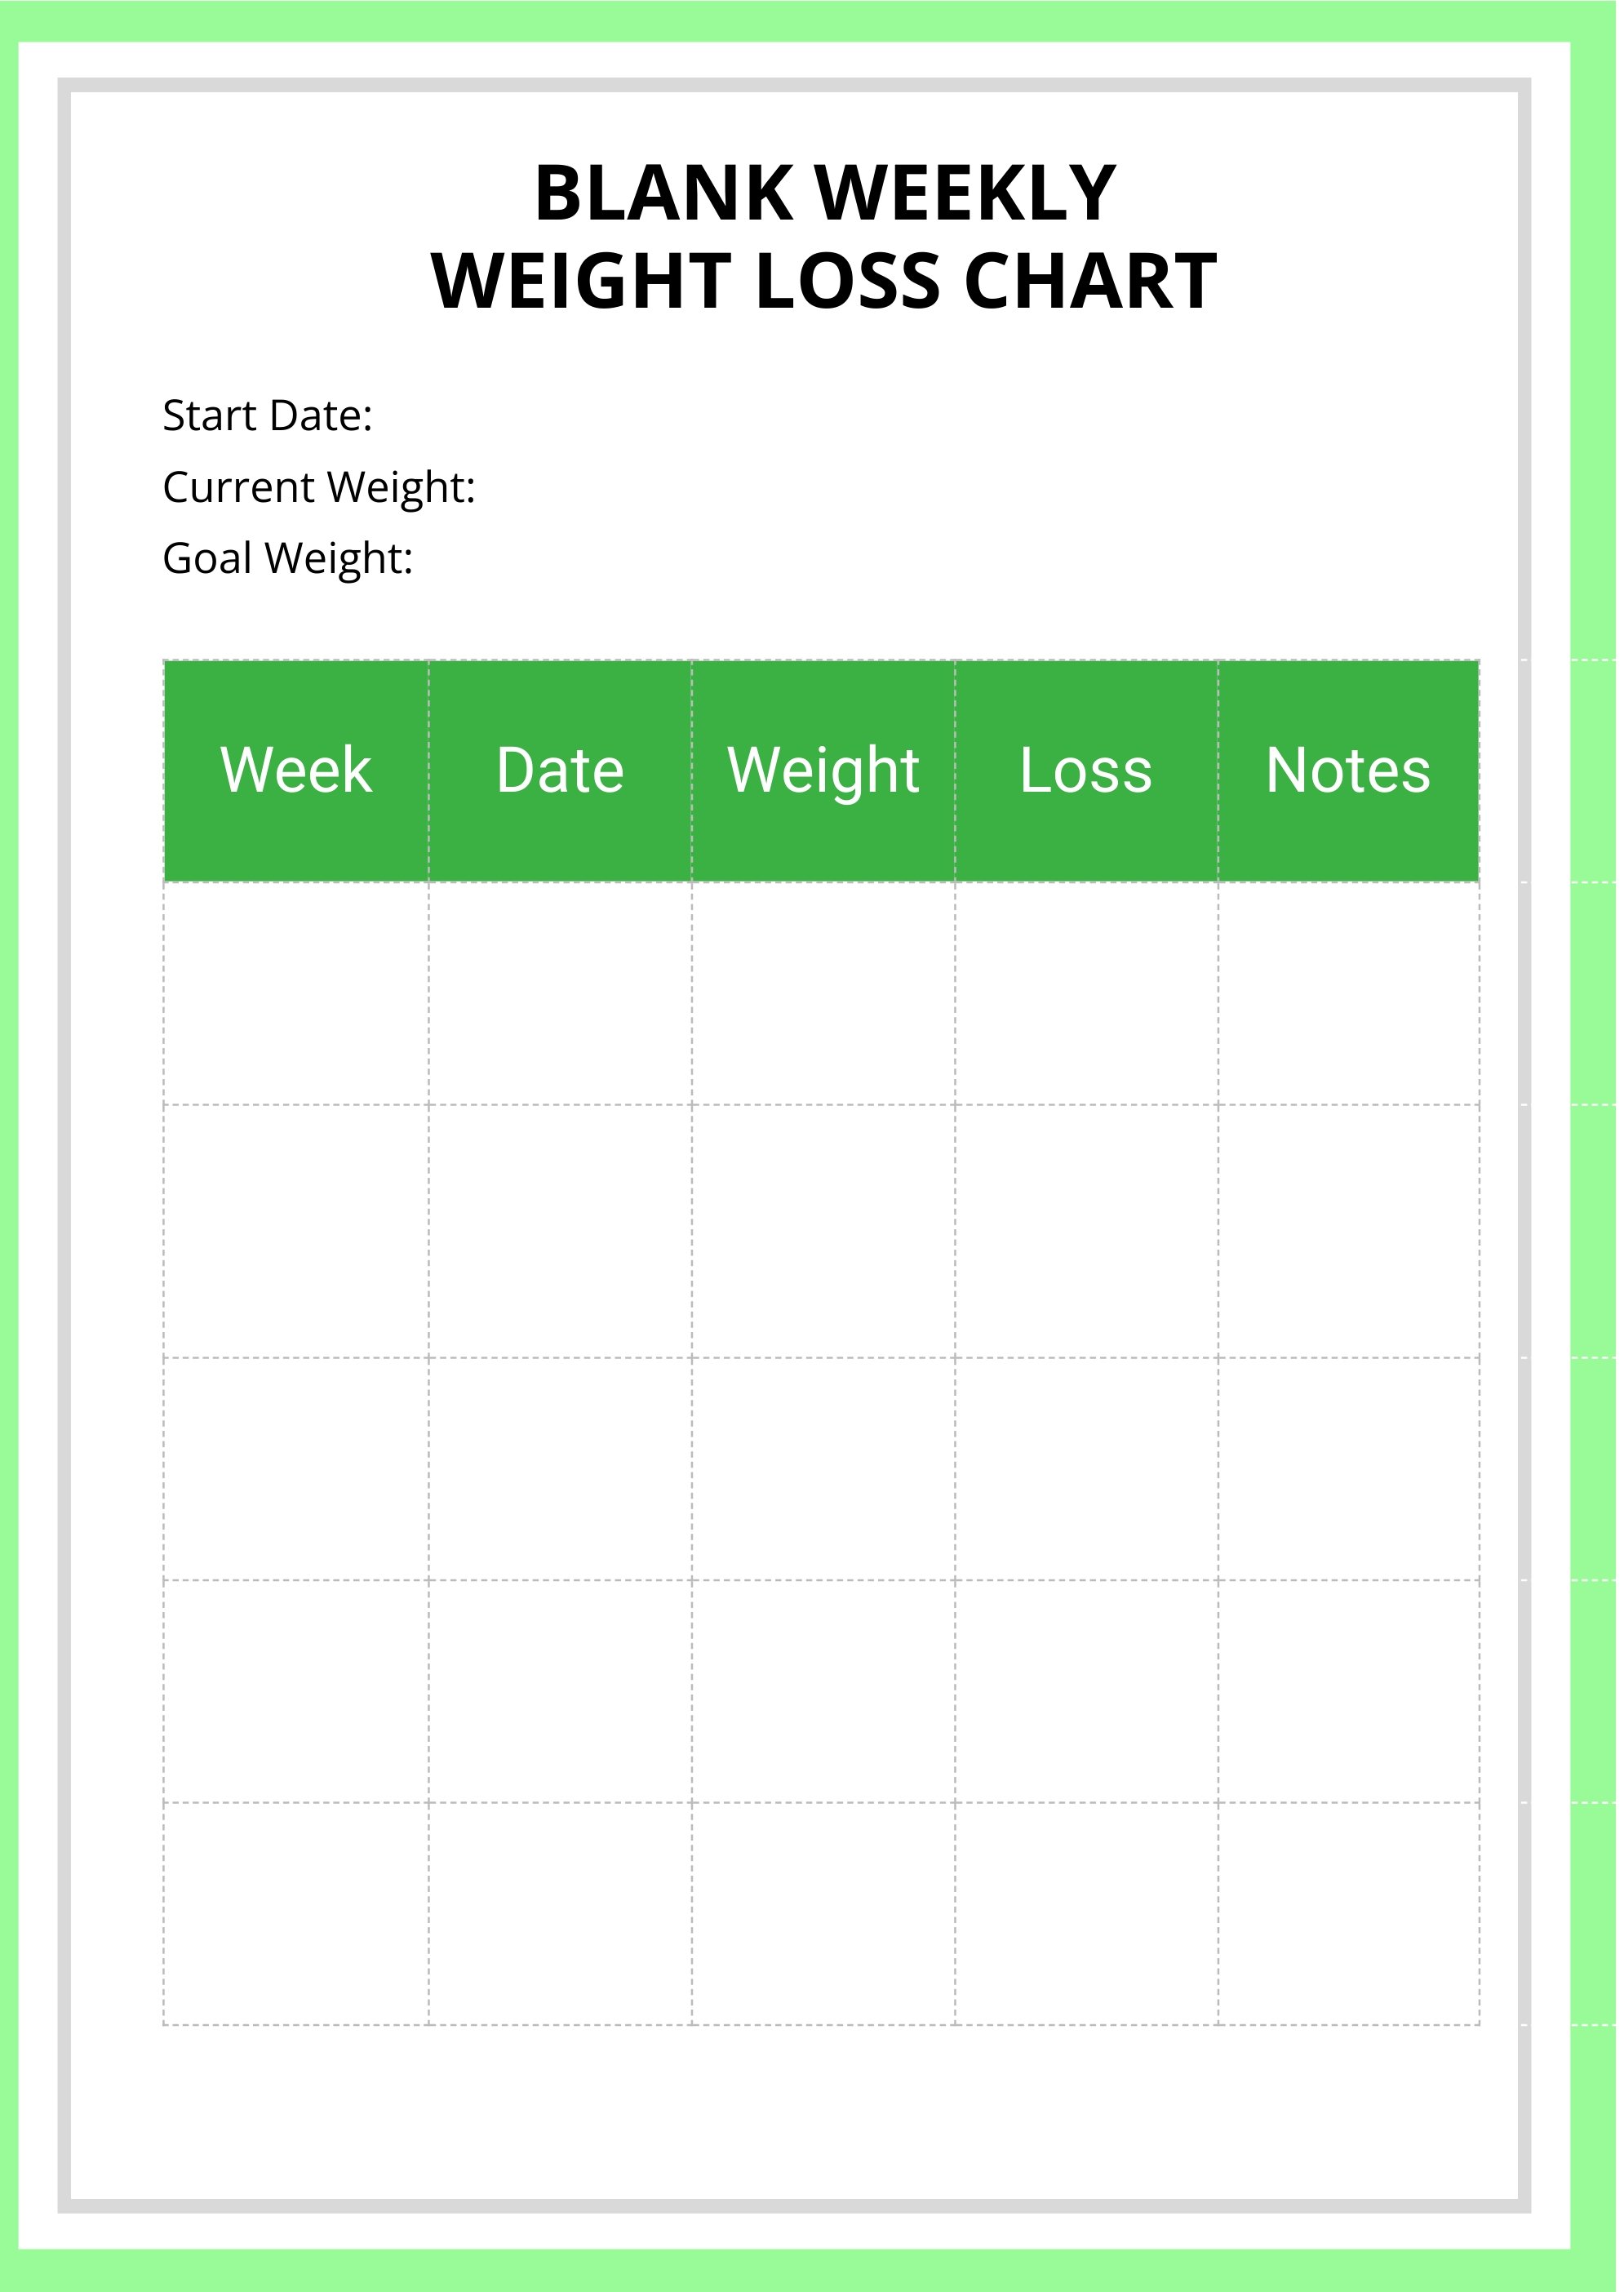 Blank Weekly Weight Loss Chart in PDF, Illustrator